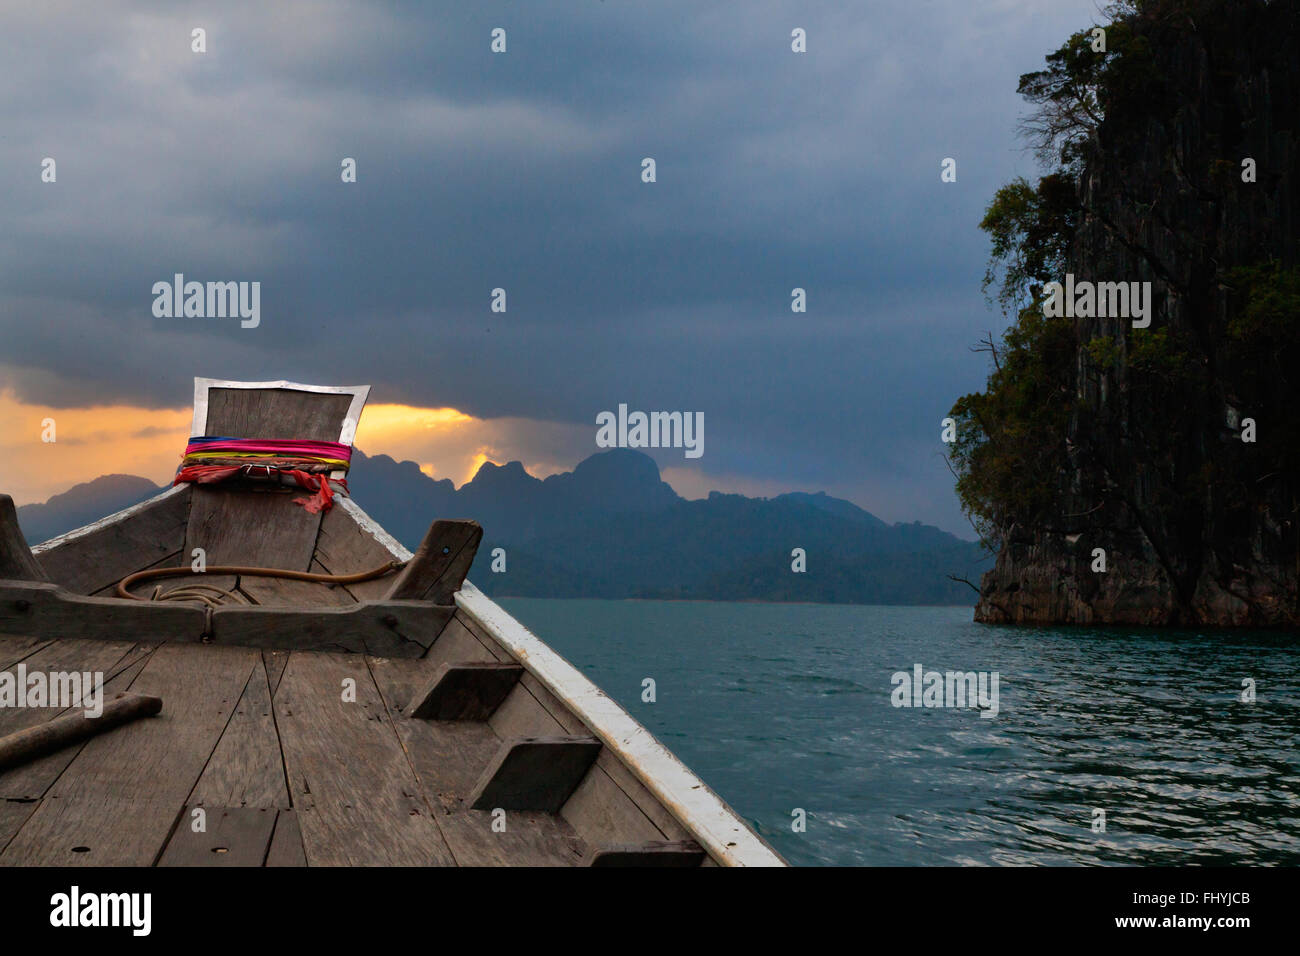 Boating at sunset on CHEOW EN LAKE in KHAO SOK NATIONAL PARK - THAILAND Stock Photo